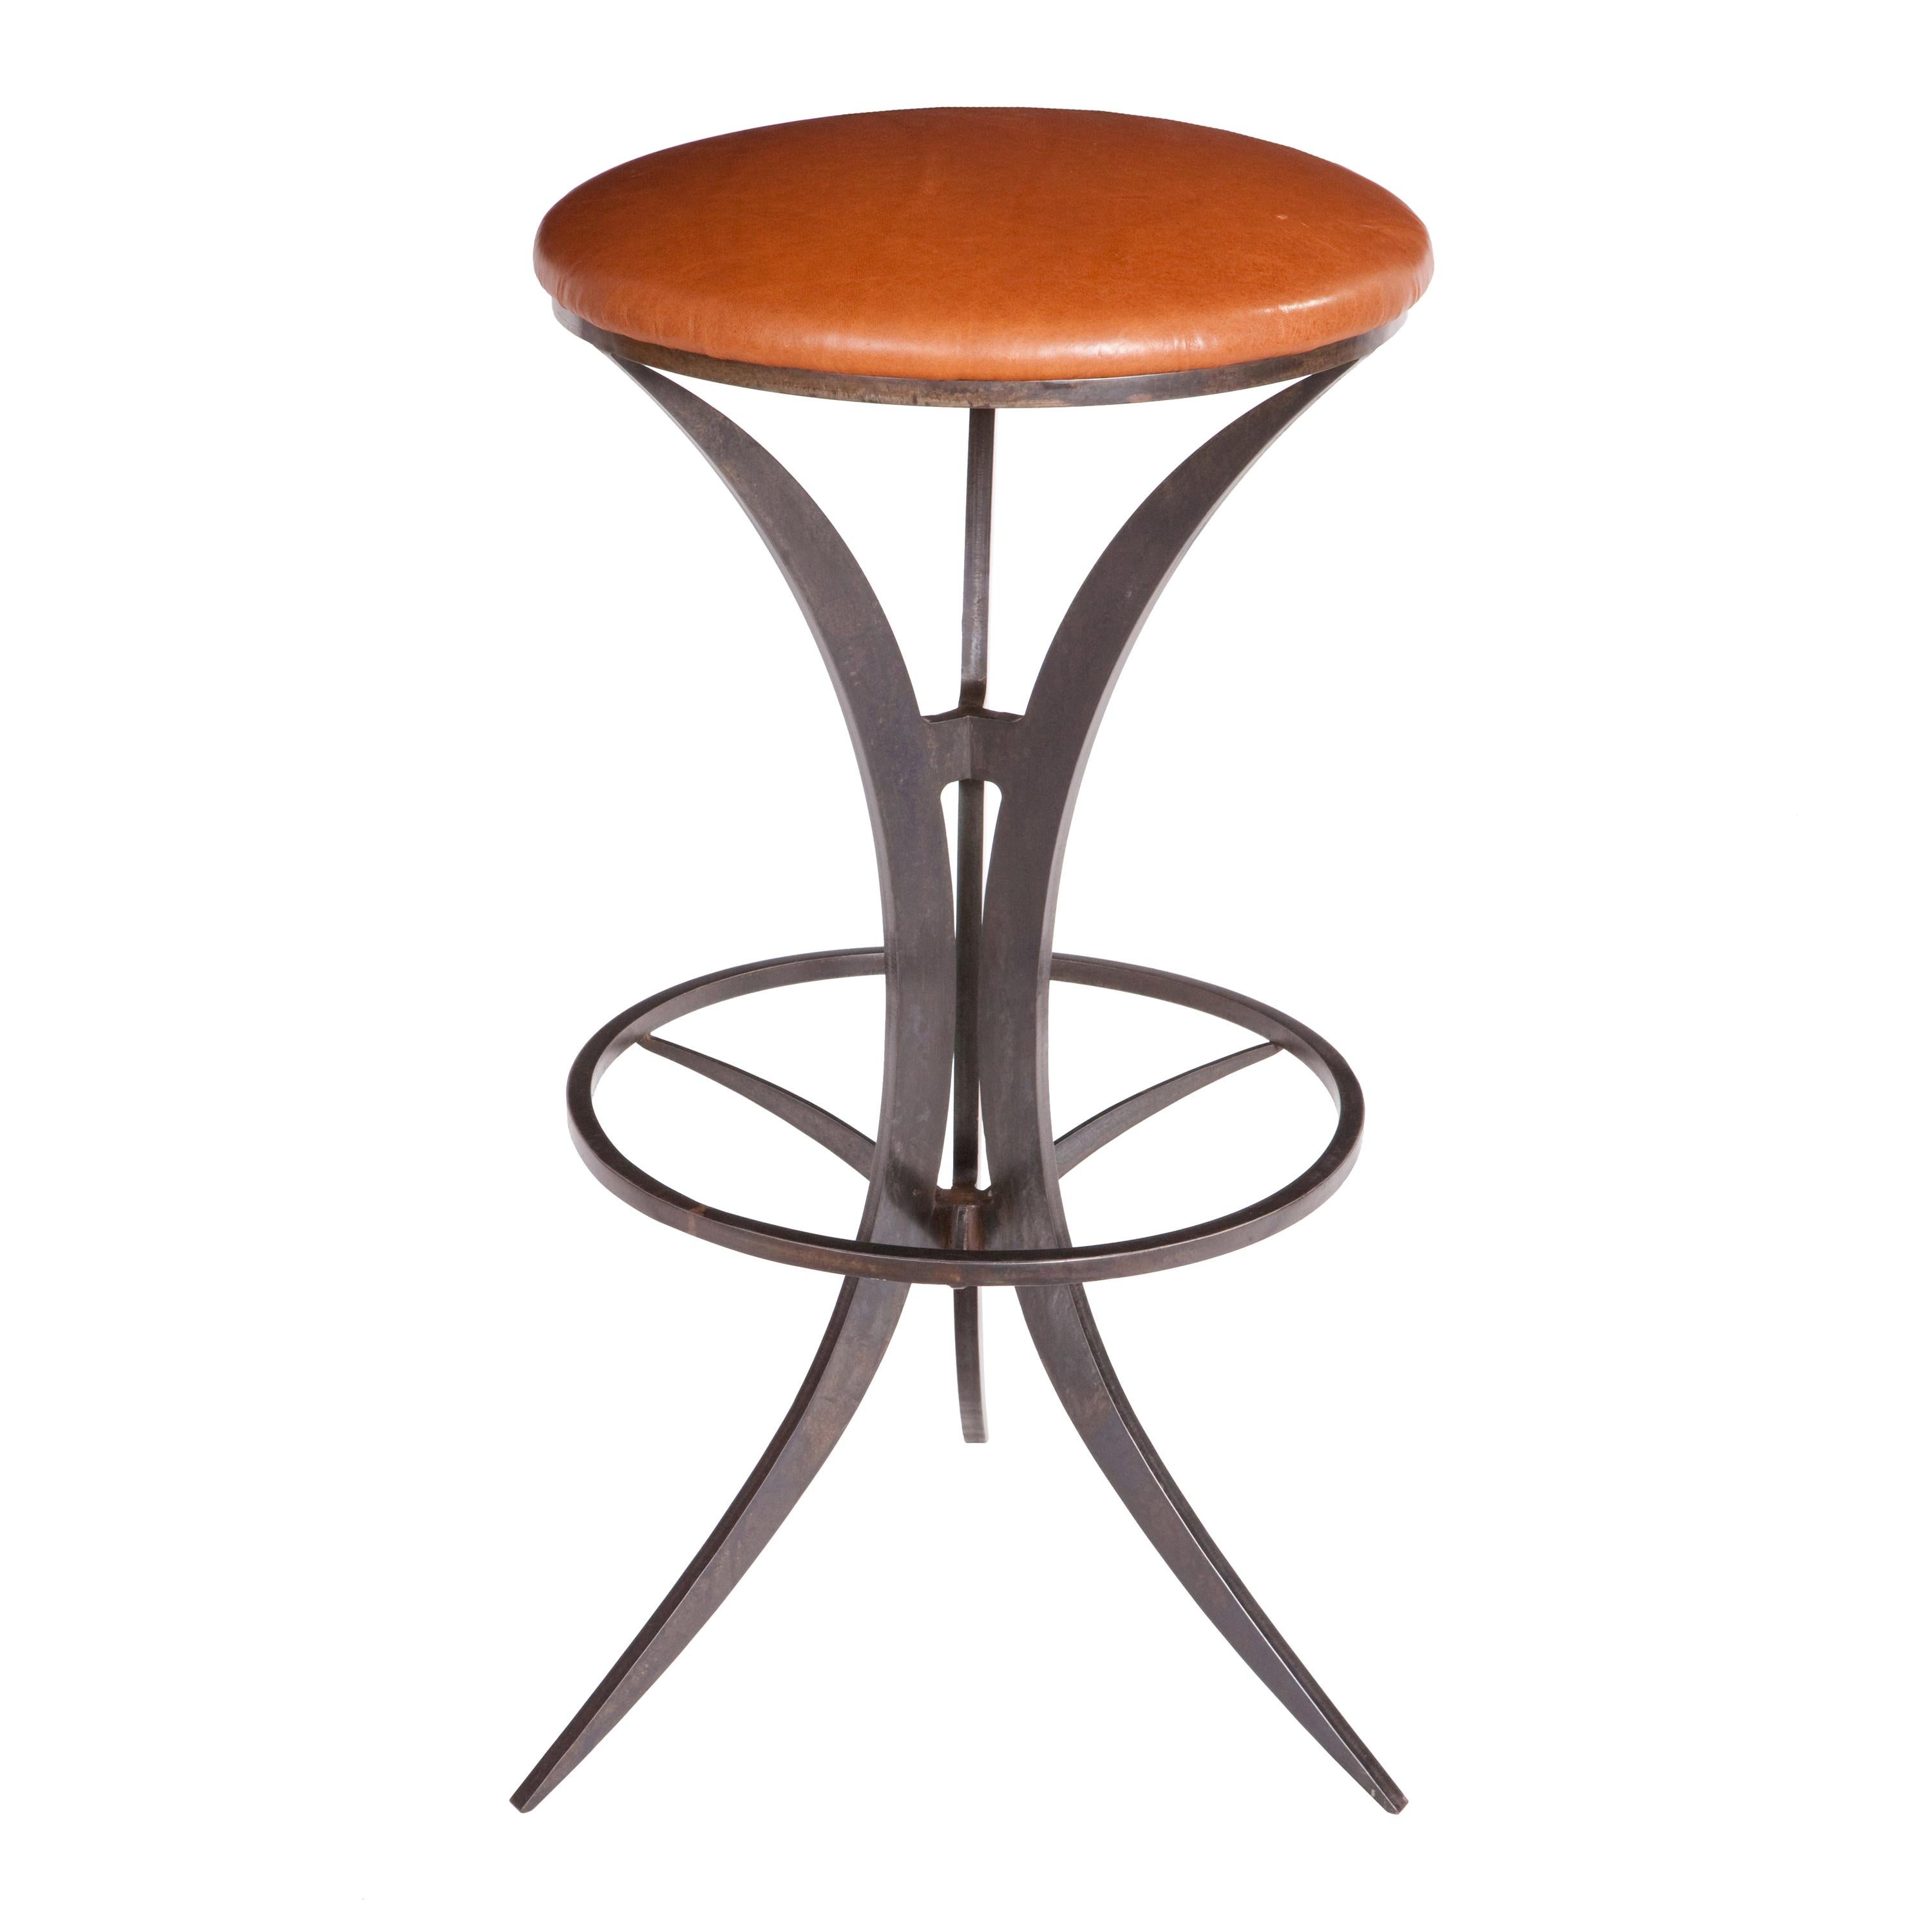 Martini Bar Stool in Steel and customized in Wood, Leather or Upholstered Seats For Sale